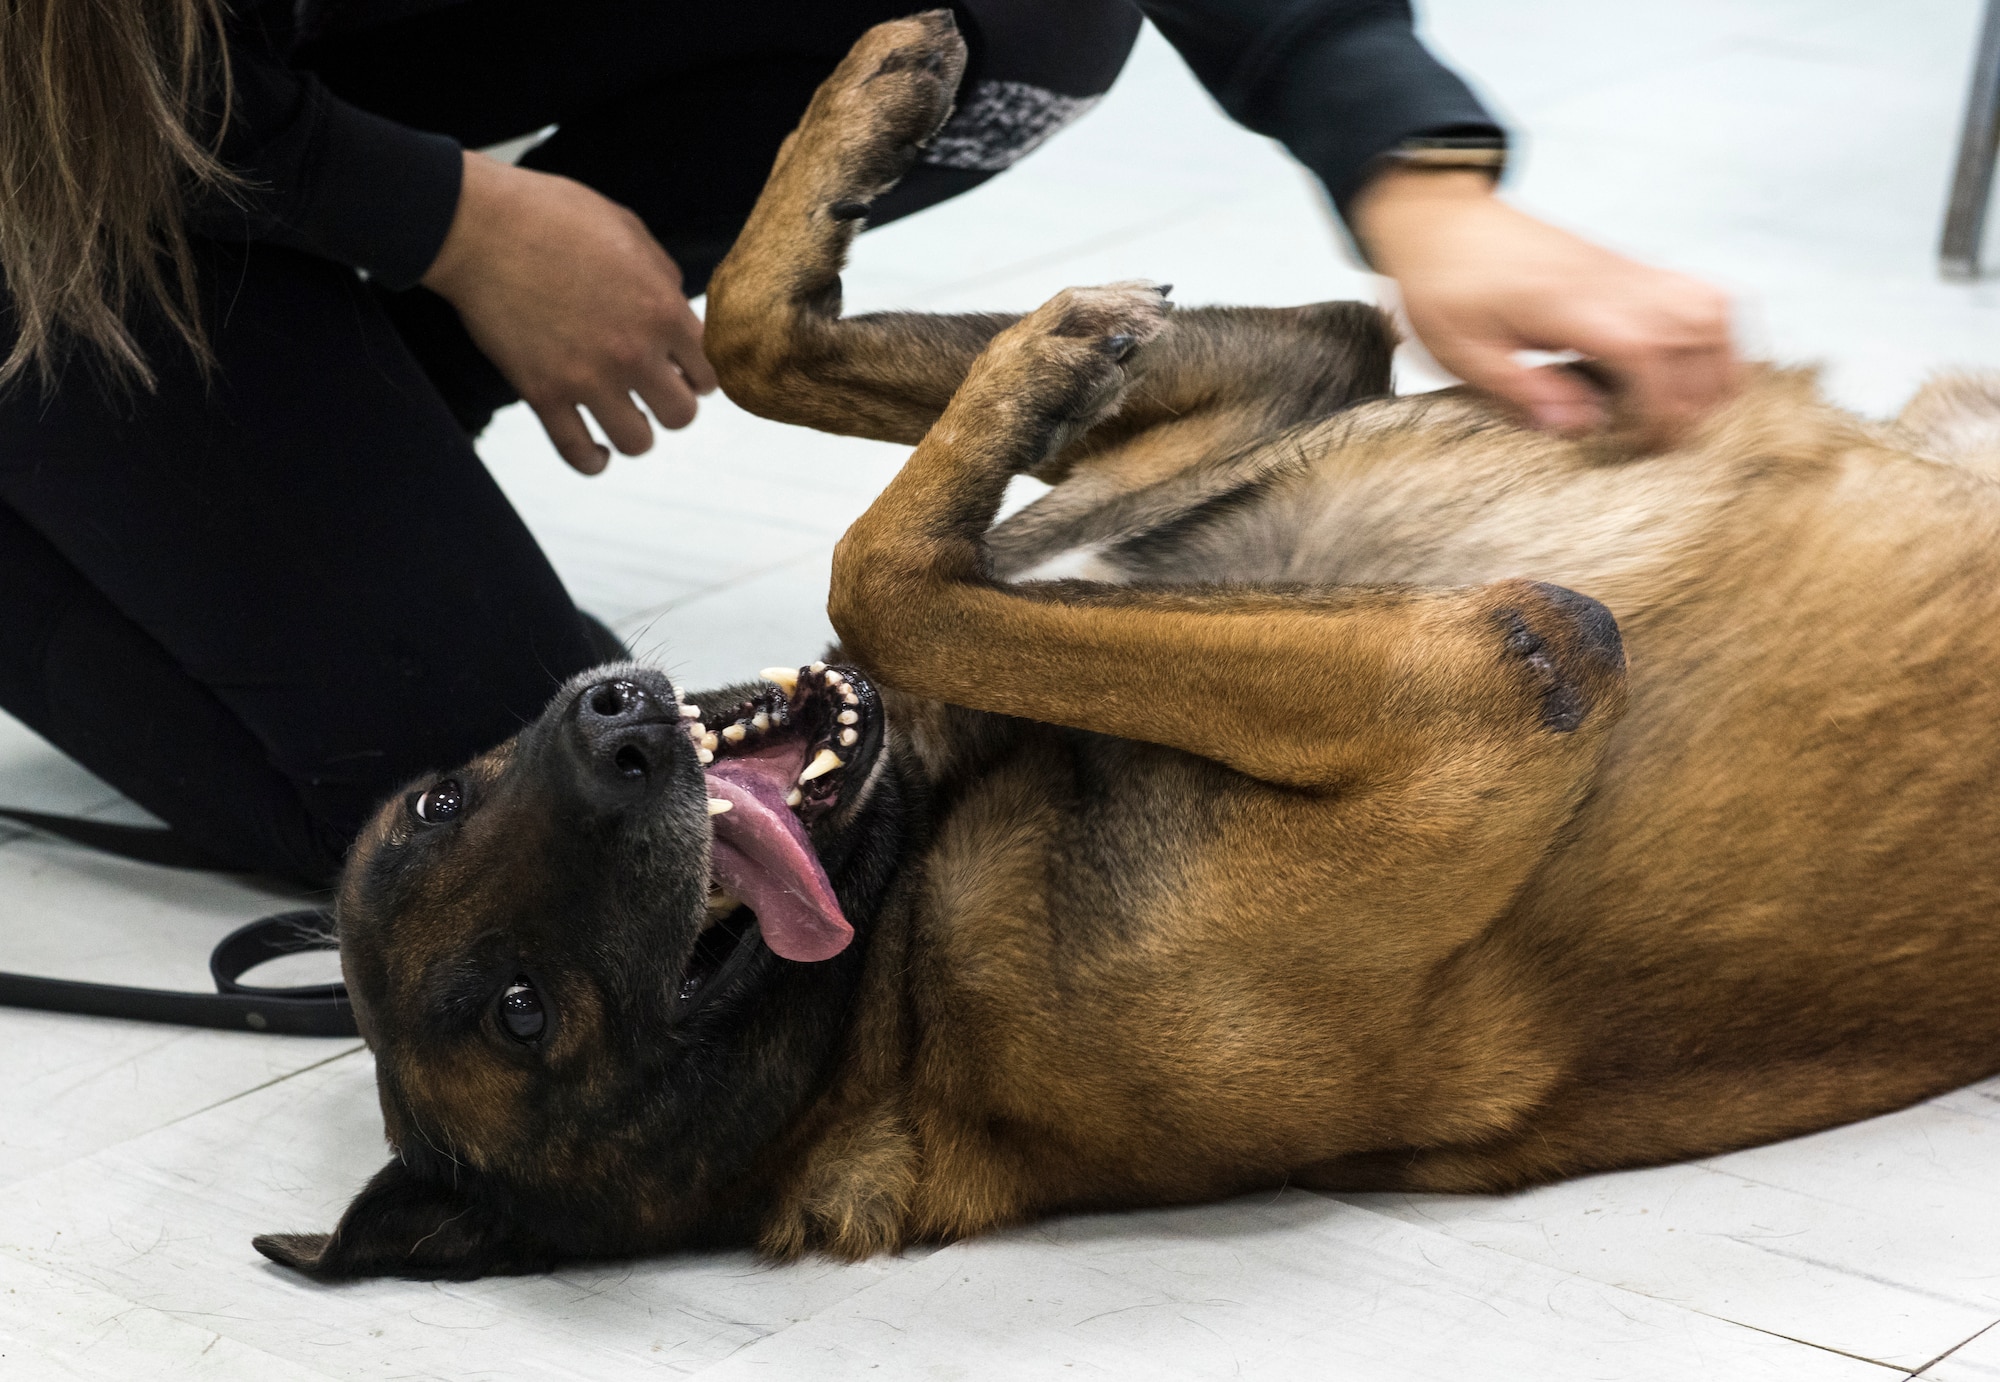 U.S. Air Force military working dog Vviking receives a belly rub from his handler before his teeth cleaning at an undisclosed location in Southwest Asia, Dec. 7, 2018. The veterinary clinic here teams up with the medical group to ensure the military working dogs receive the best care while deployed.